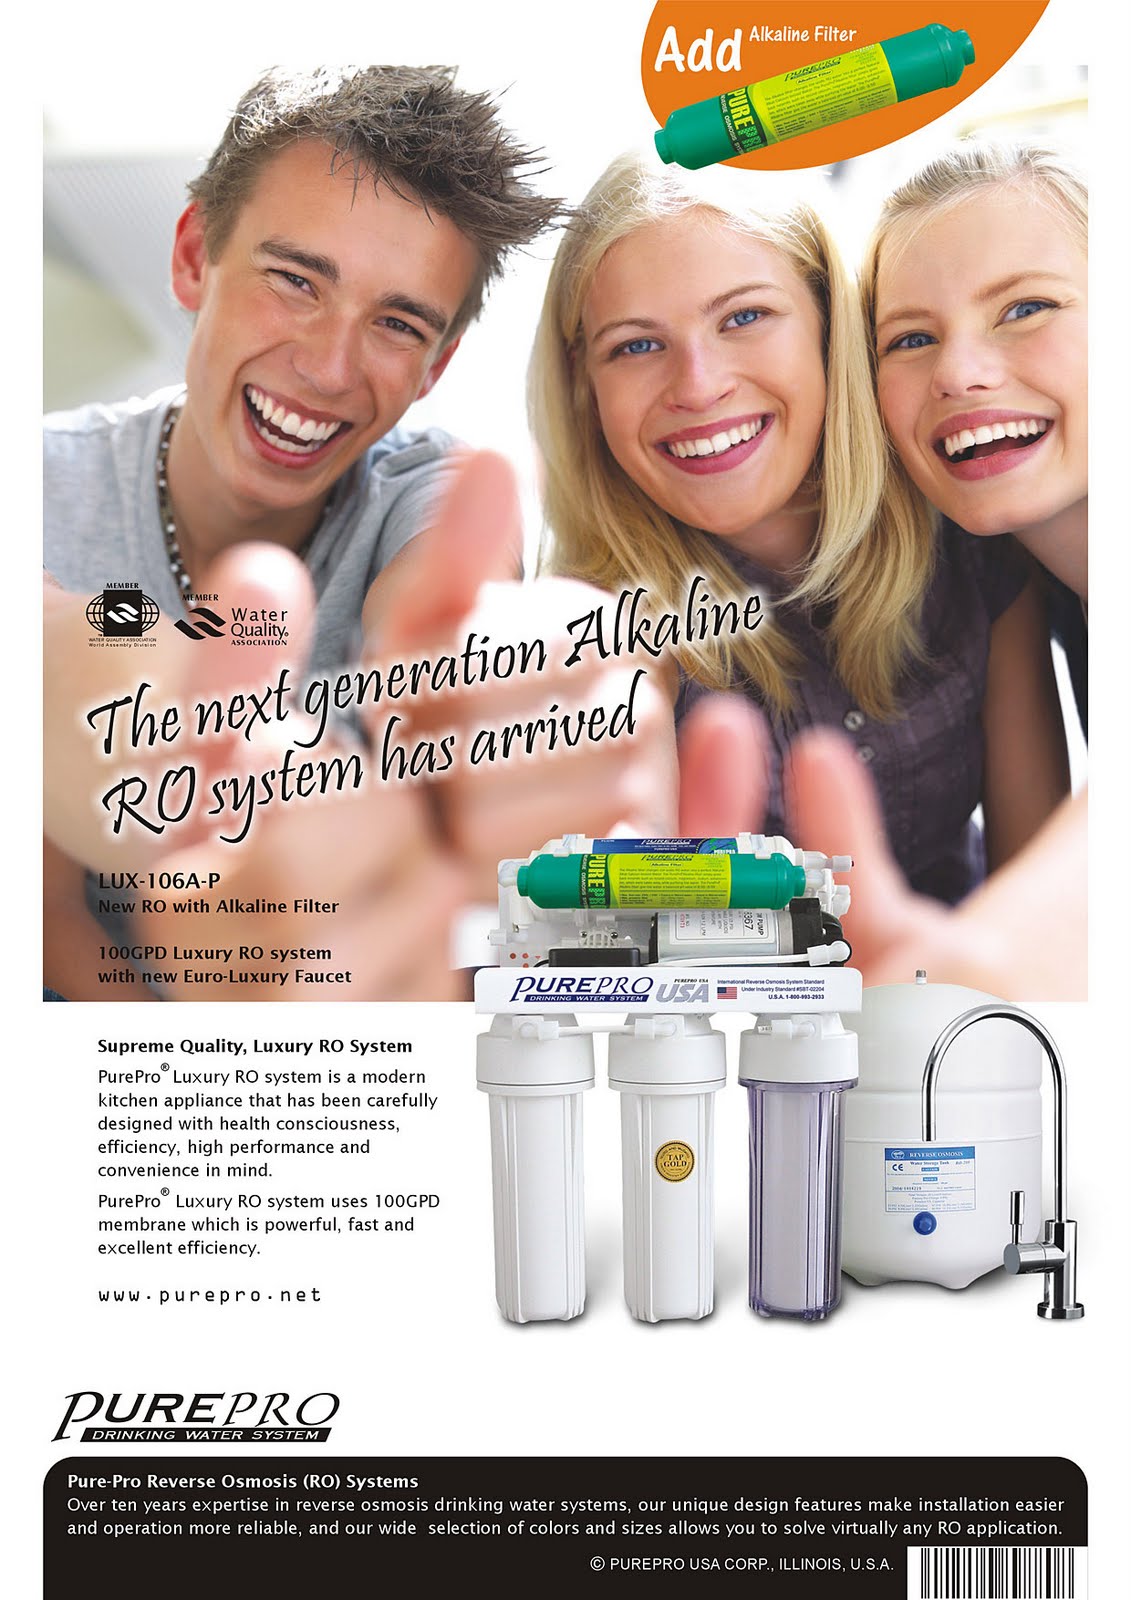 PurePro® LUX-106A-P Reverse Osmosis Water Filtration System